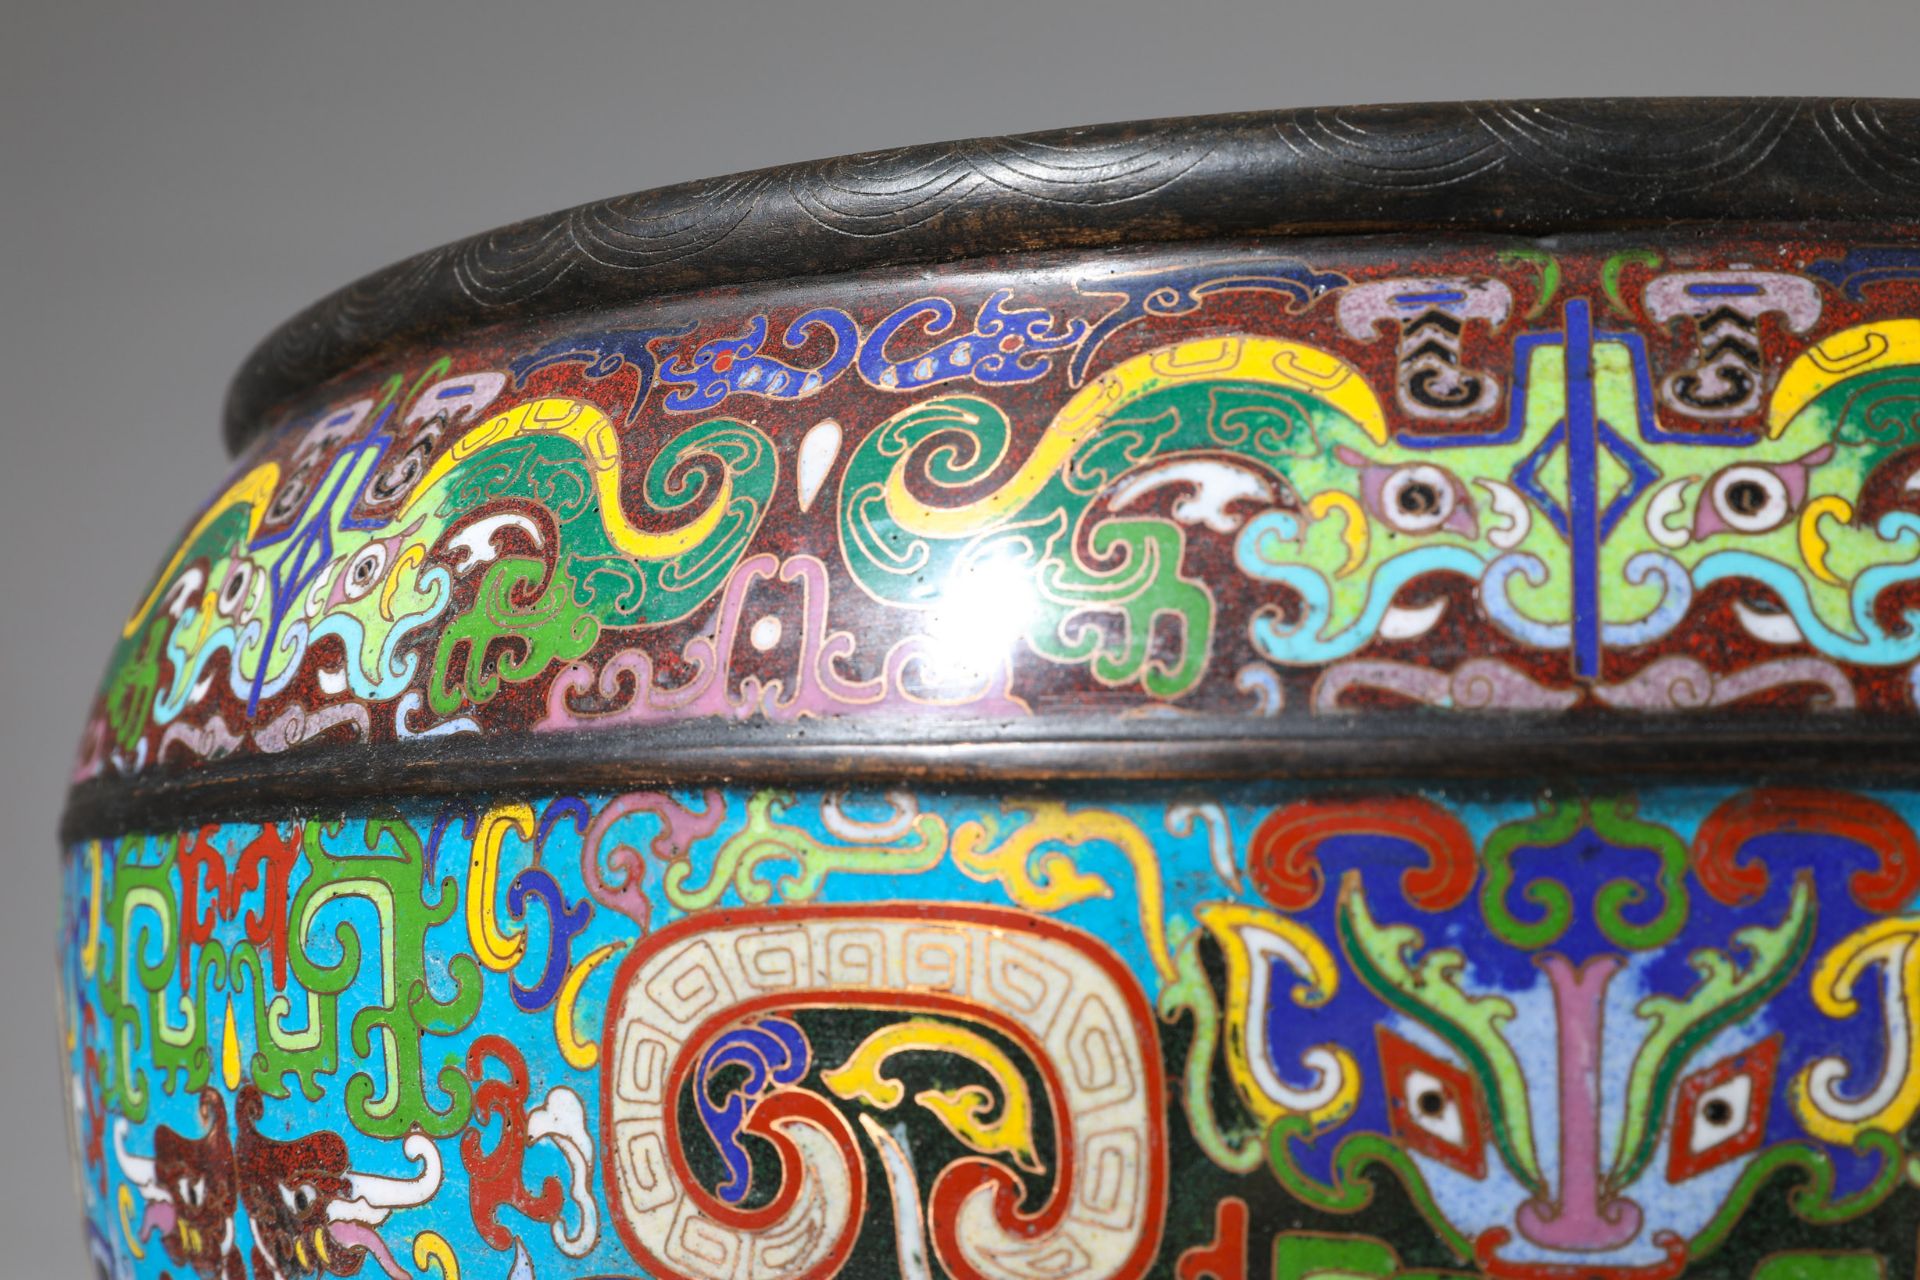 Large Cloisonné bowl with Taotie masks and tendrils - Image 3 of 7